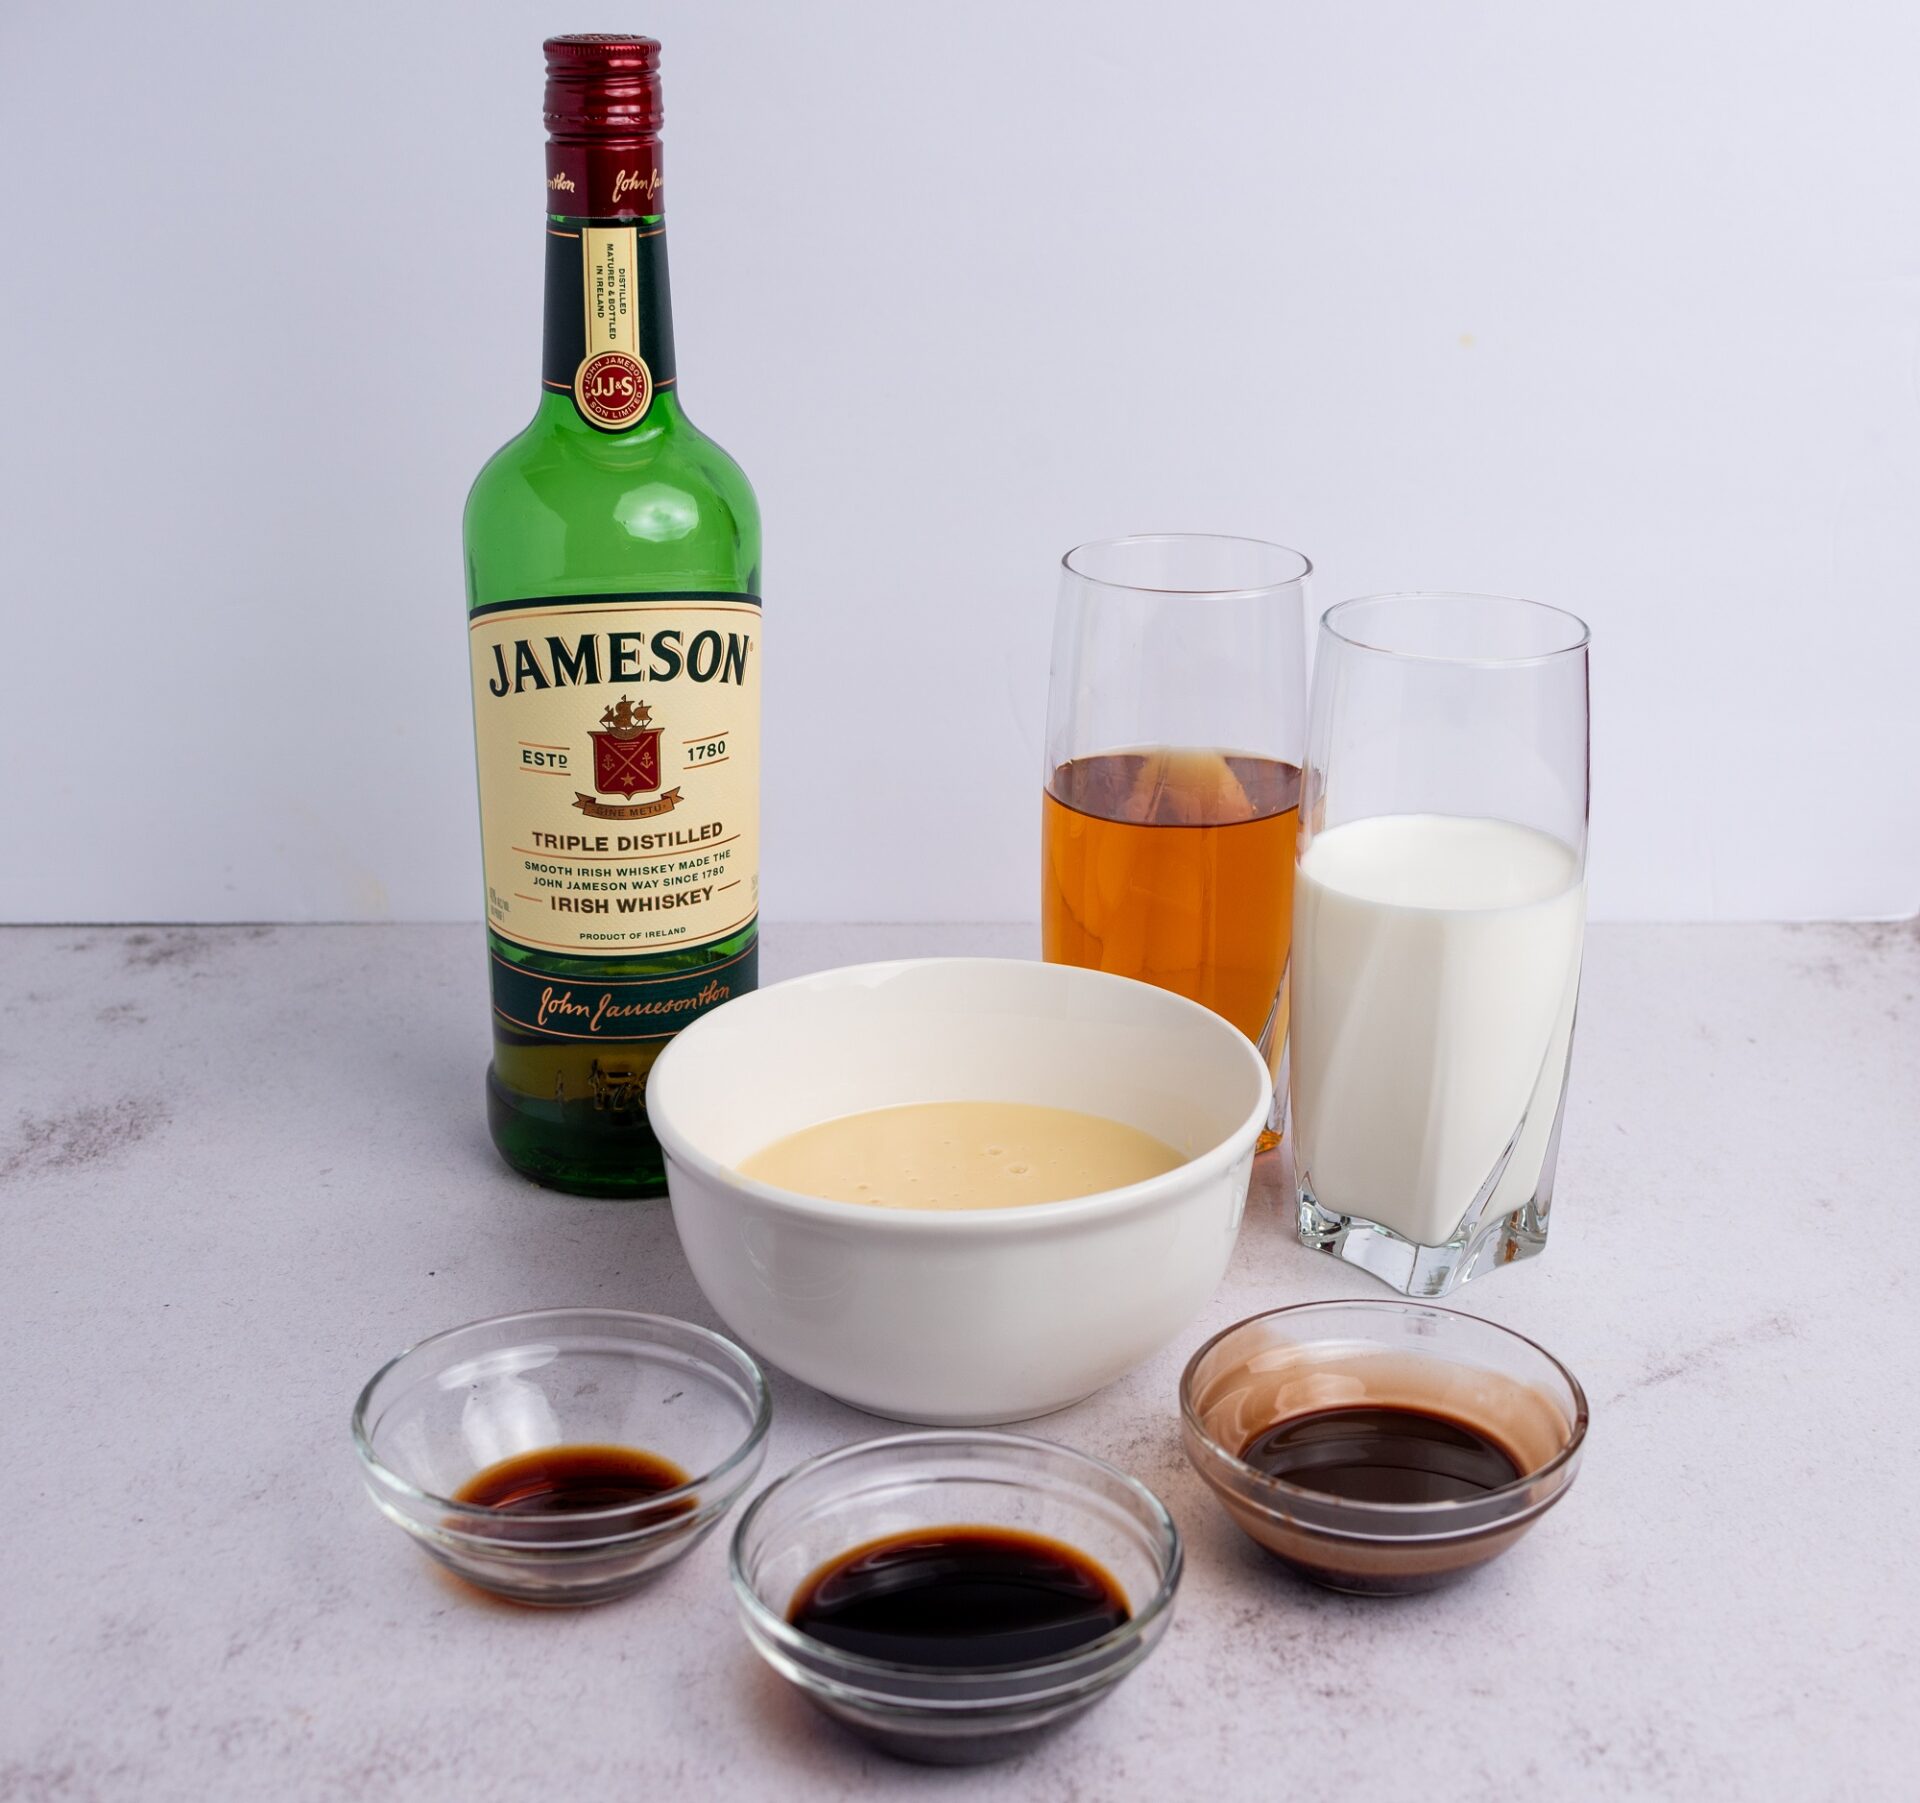 Ingredients for homemade Baileys on a white counter.